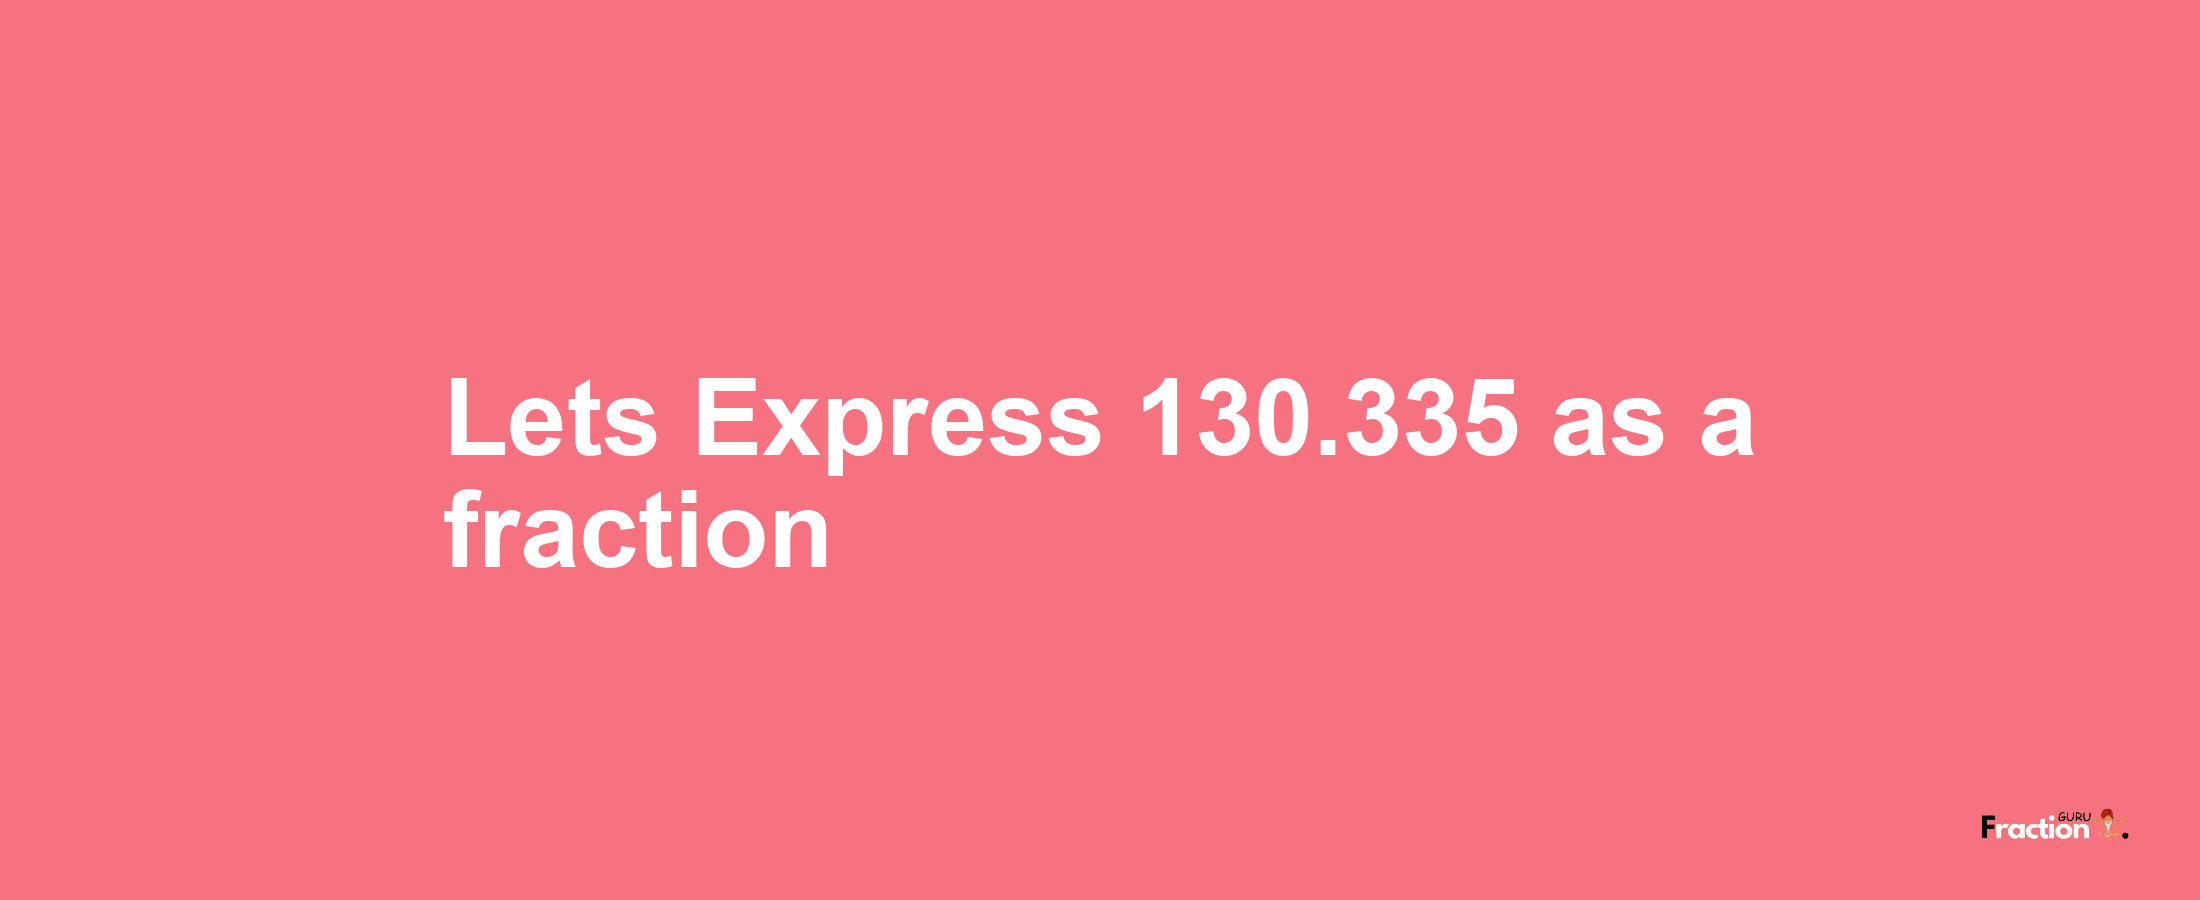 Lets Express 130.335 as afraction